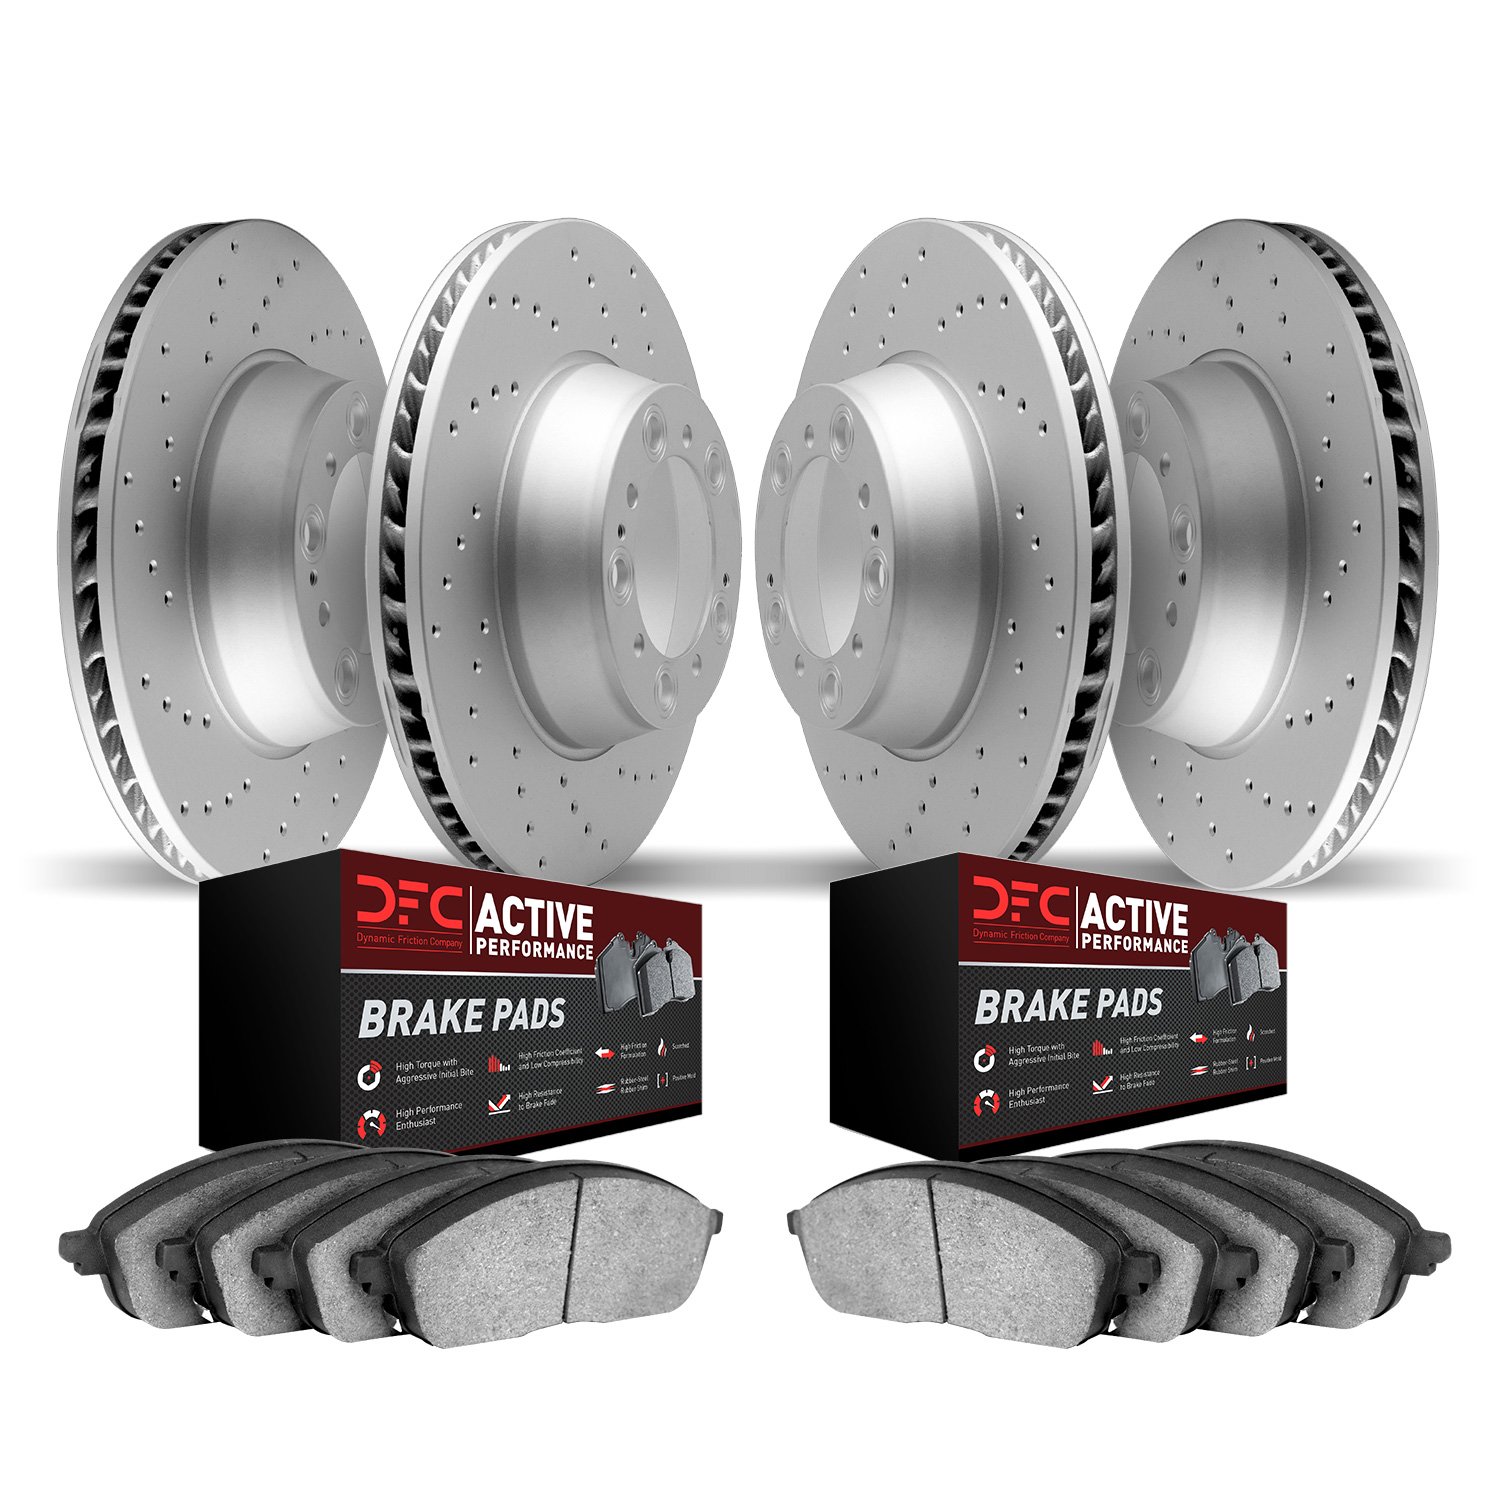 2704-31122 Geoperformance Drilled Brake Rotors with Active Performance Pads Kit, 2011-2018 BMW, Position: Front and Rear